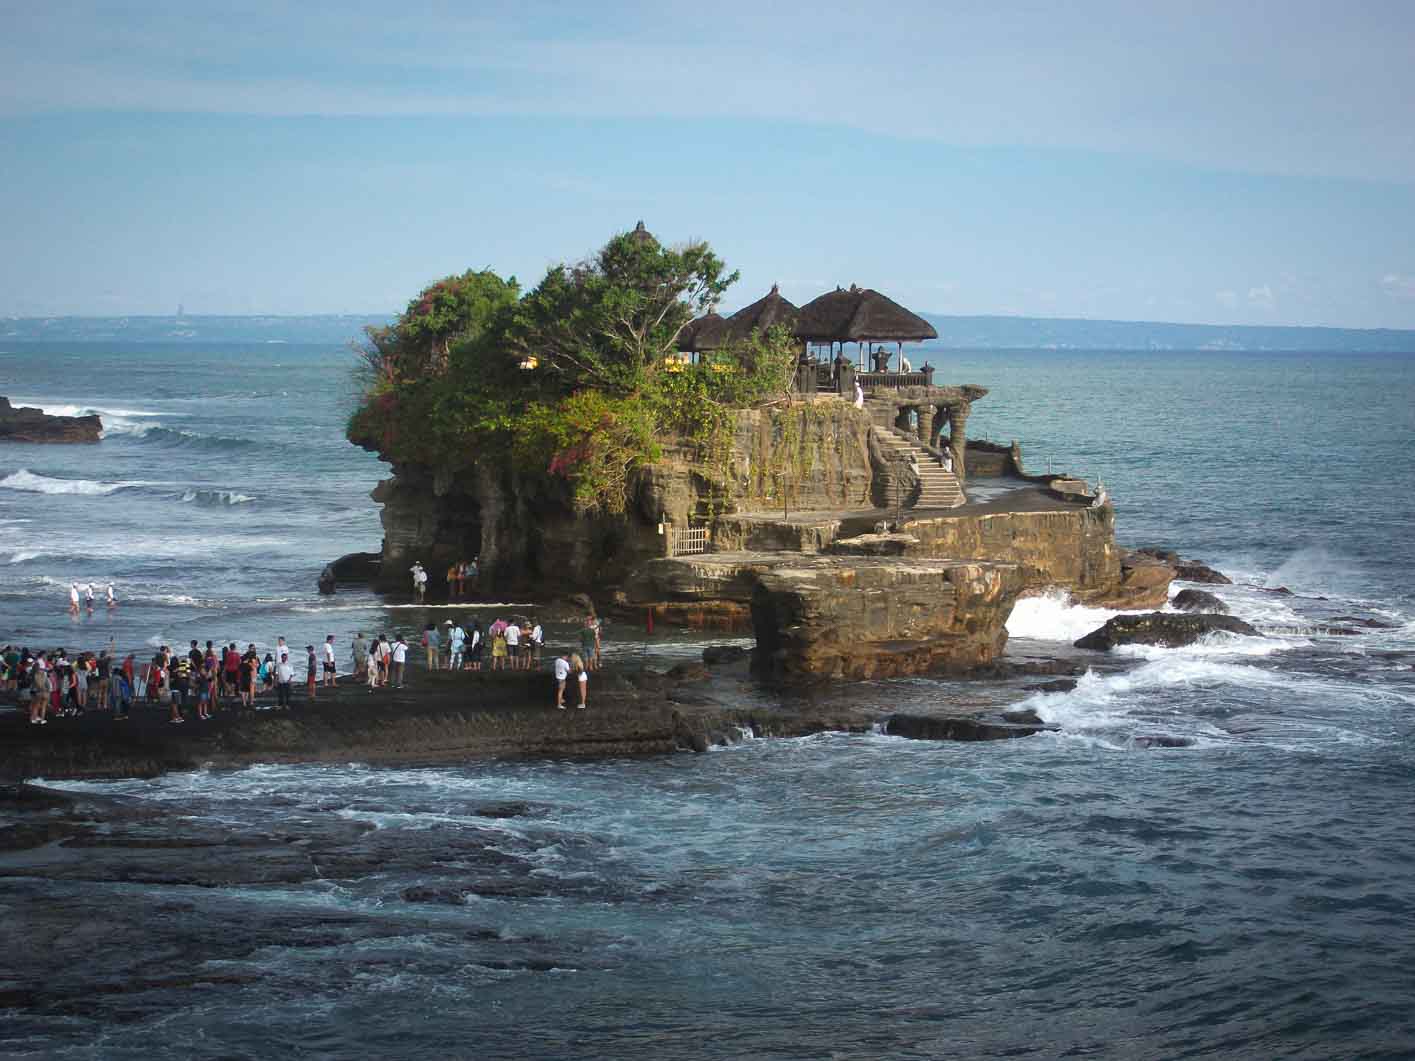 visiting tanah lot is one of the most important things to do in bali